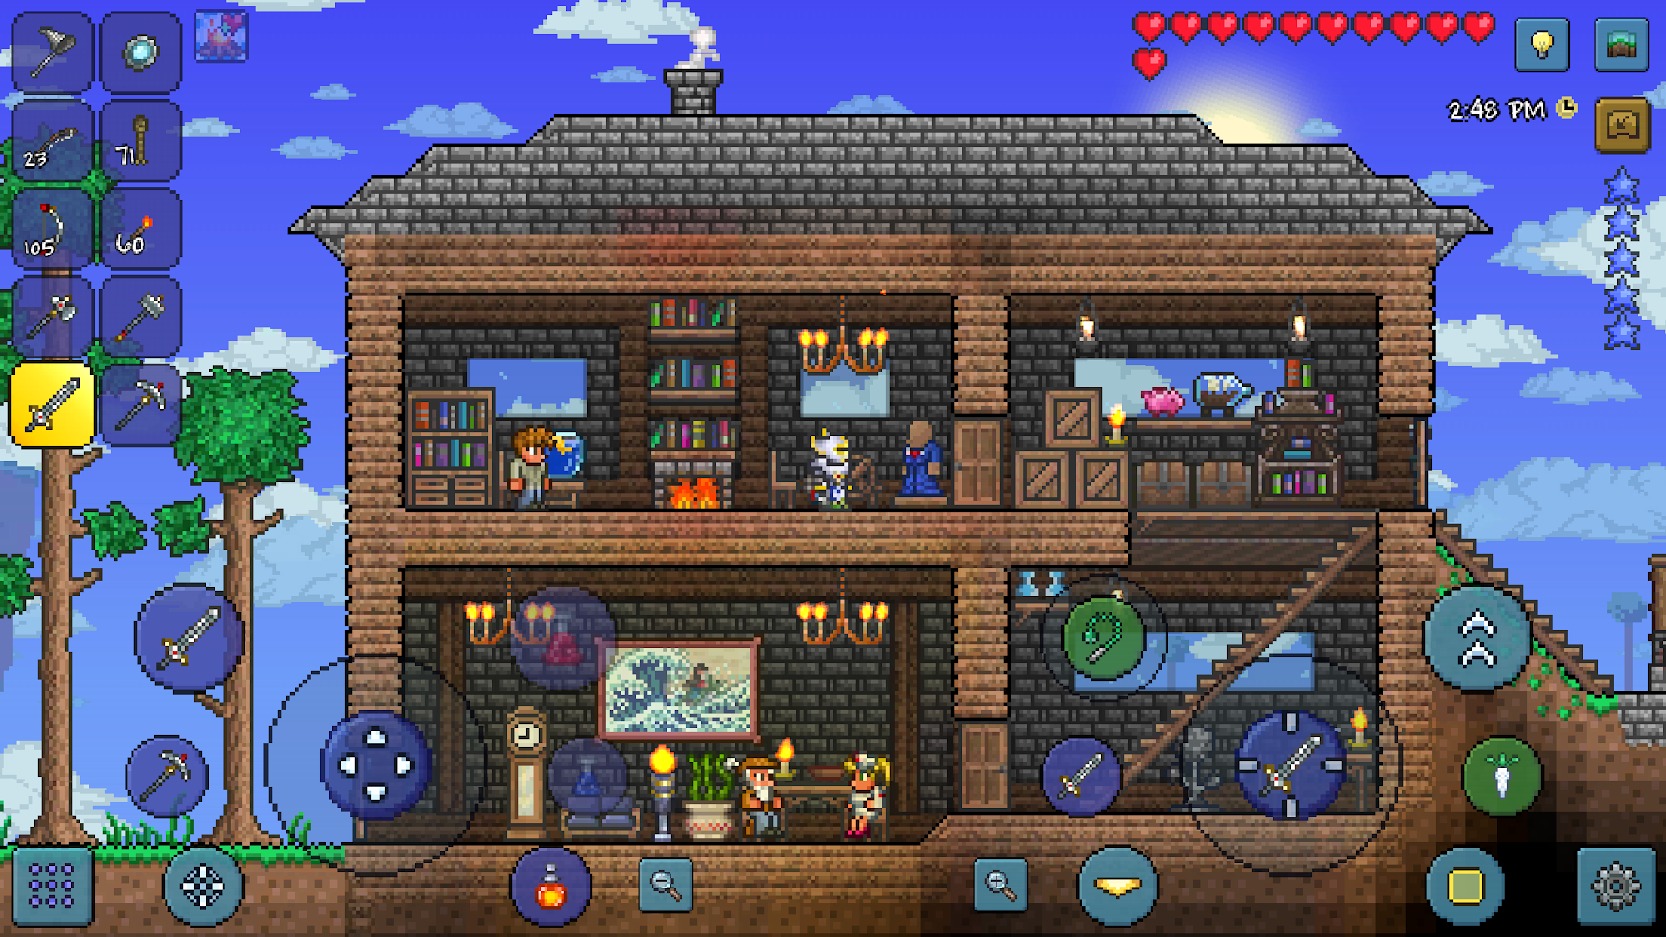 Terraria digs its way to the top spot in the App Store